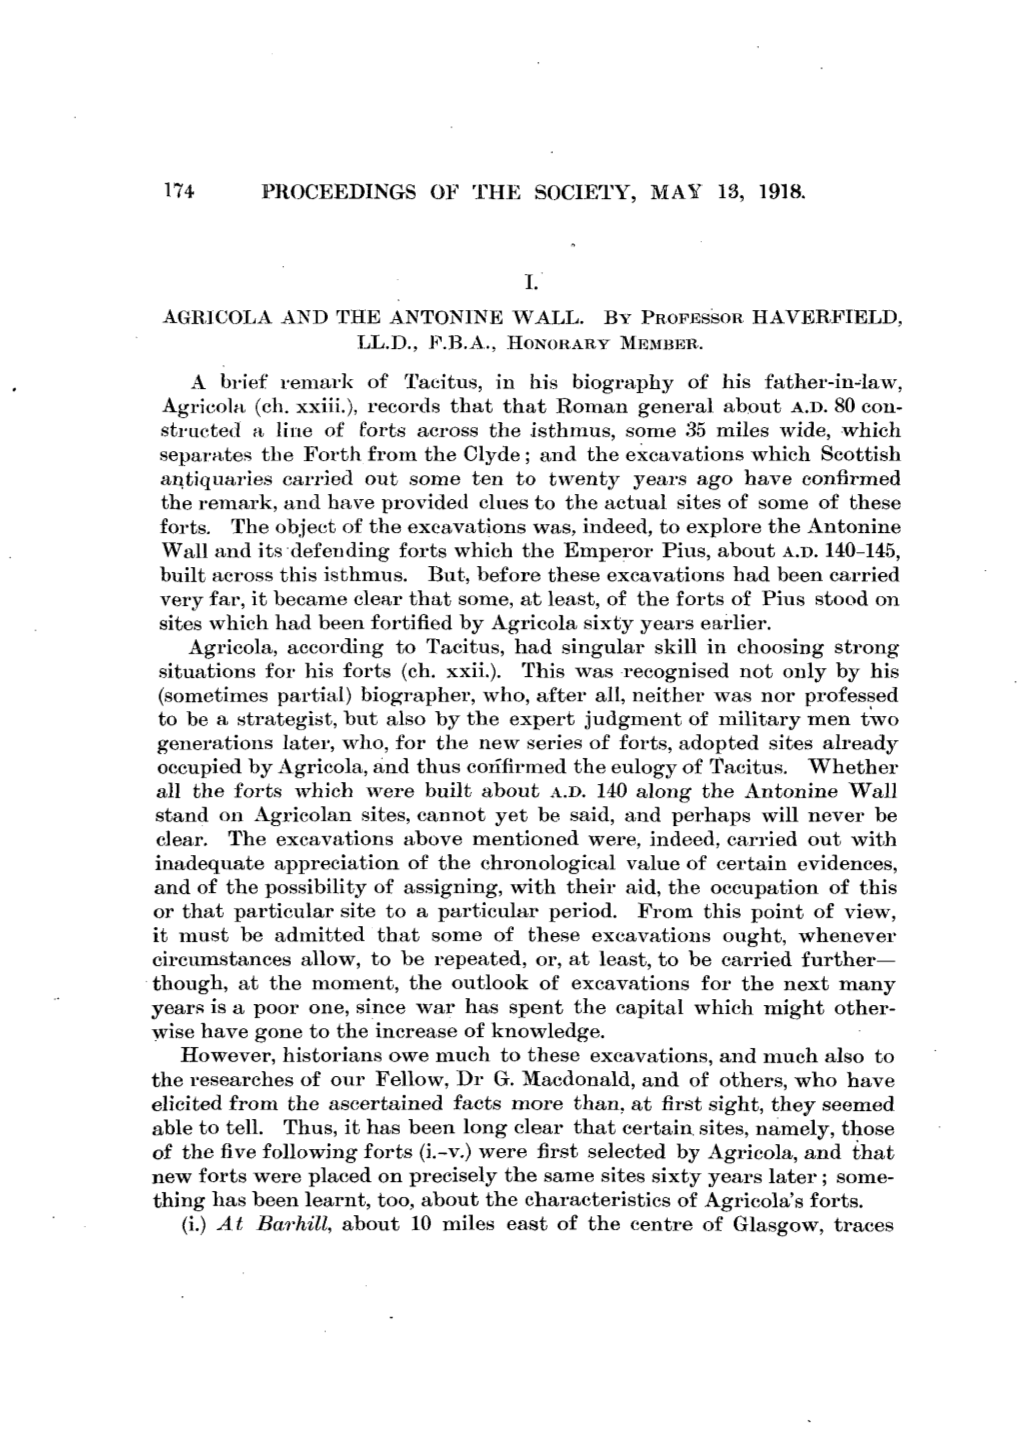 174 Proceedings of the Society, May 13, 1918. Agr1cola and the Anton1ne Wall. by Professor Haverfield, Ll.D., F.B.A., Honorary M